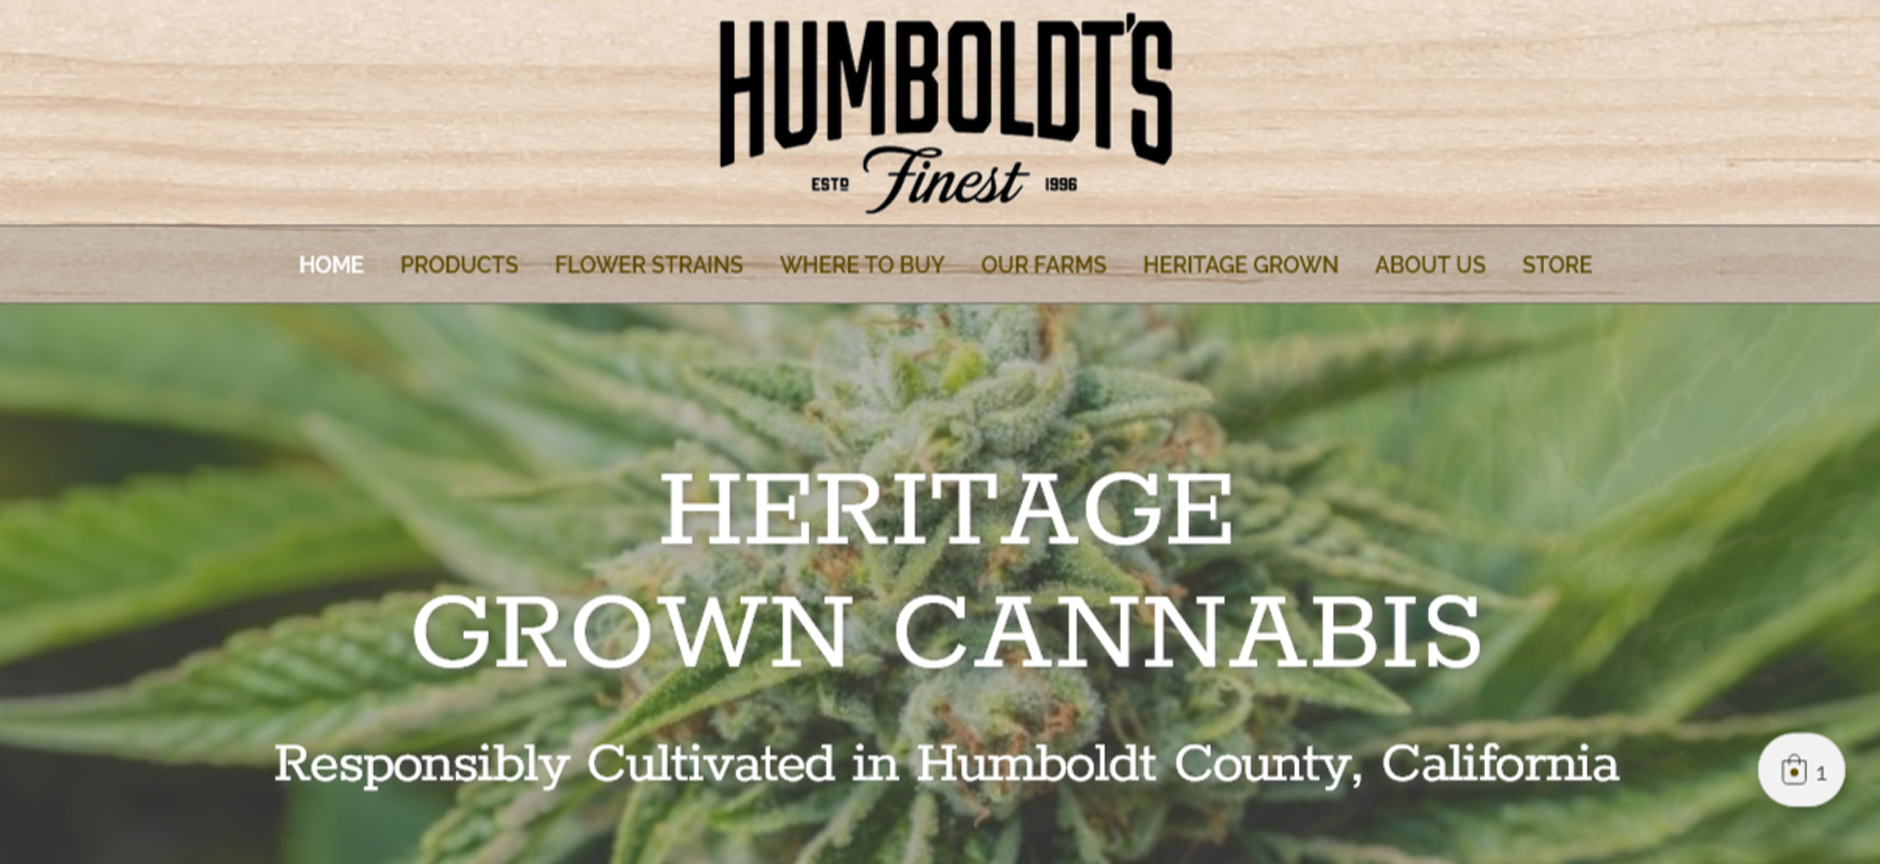 Humboldts Finest Website and Full Graphics